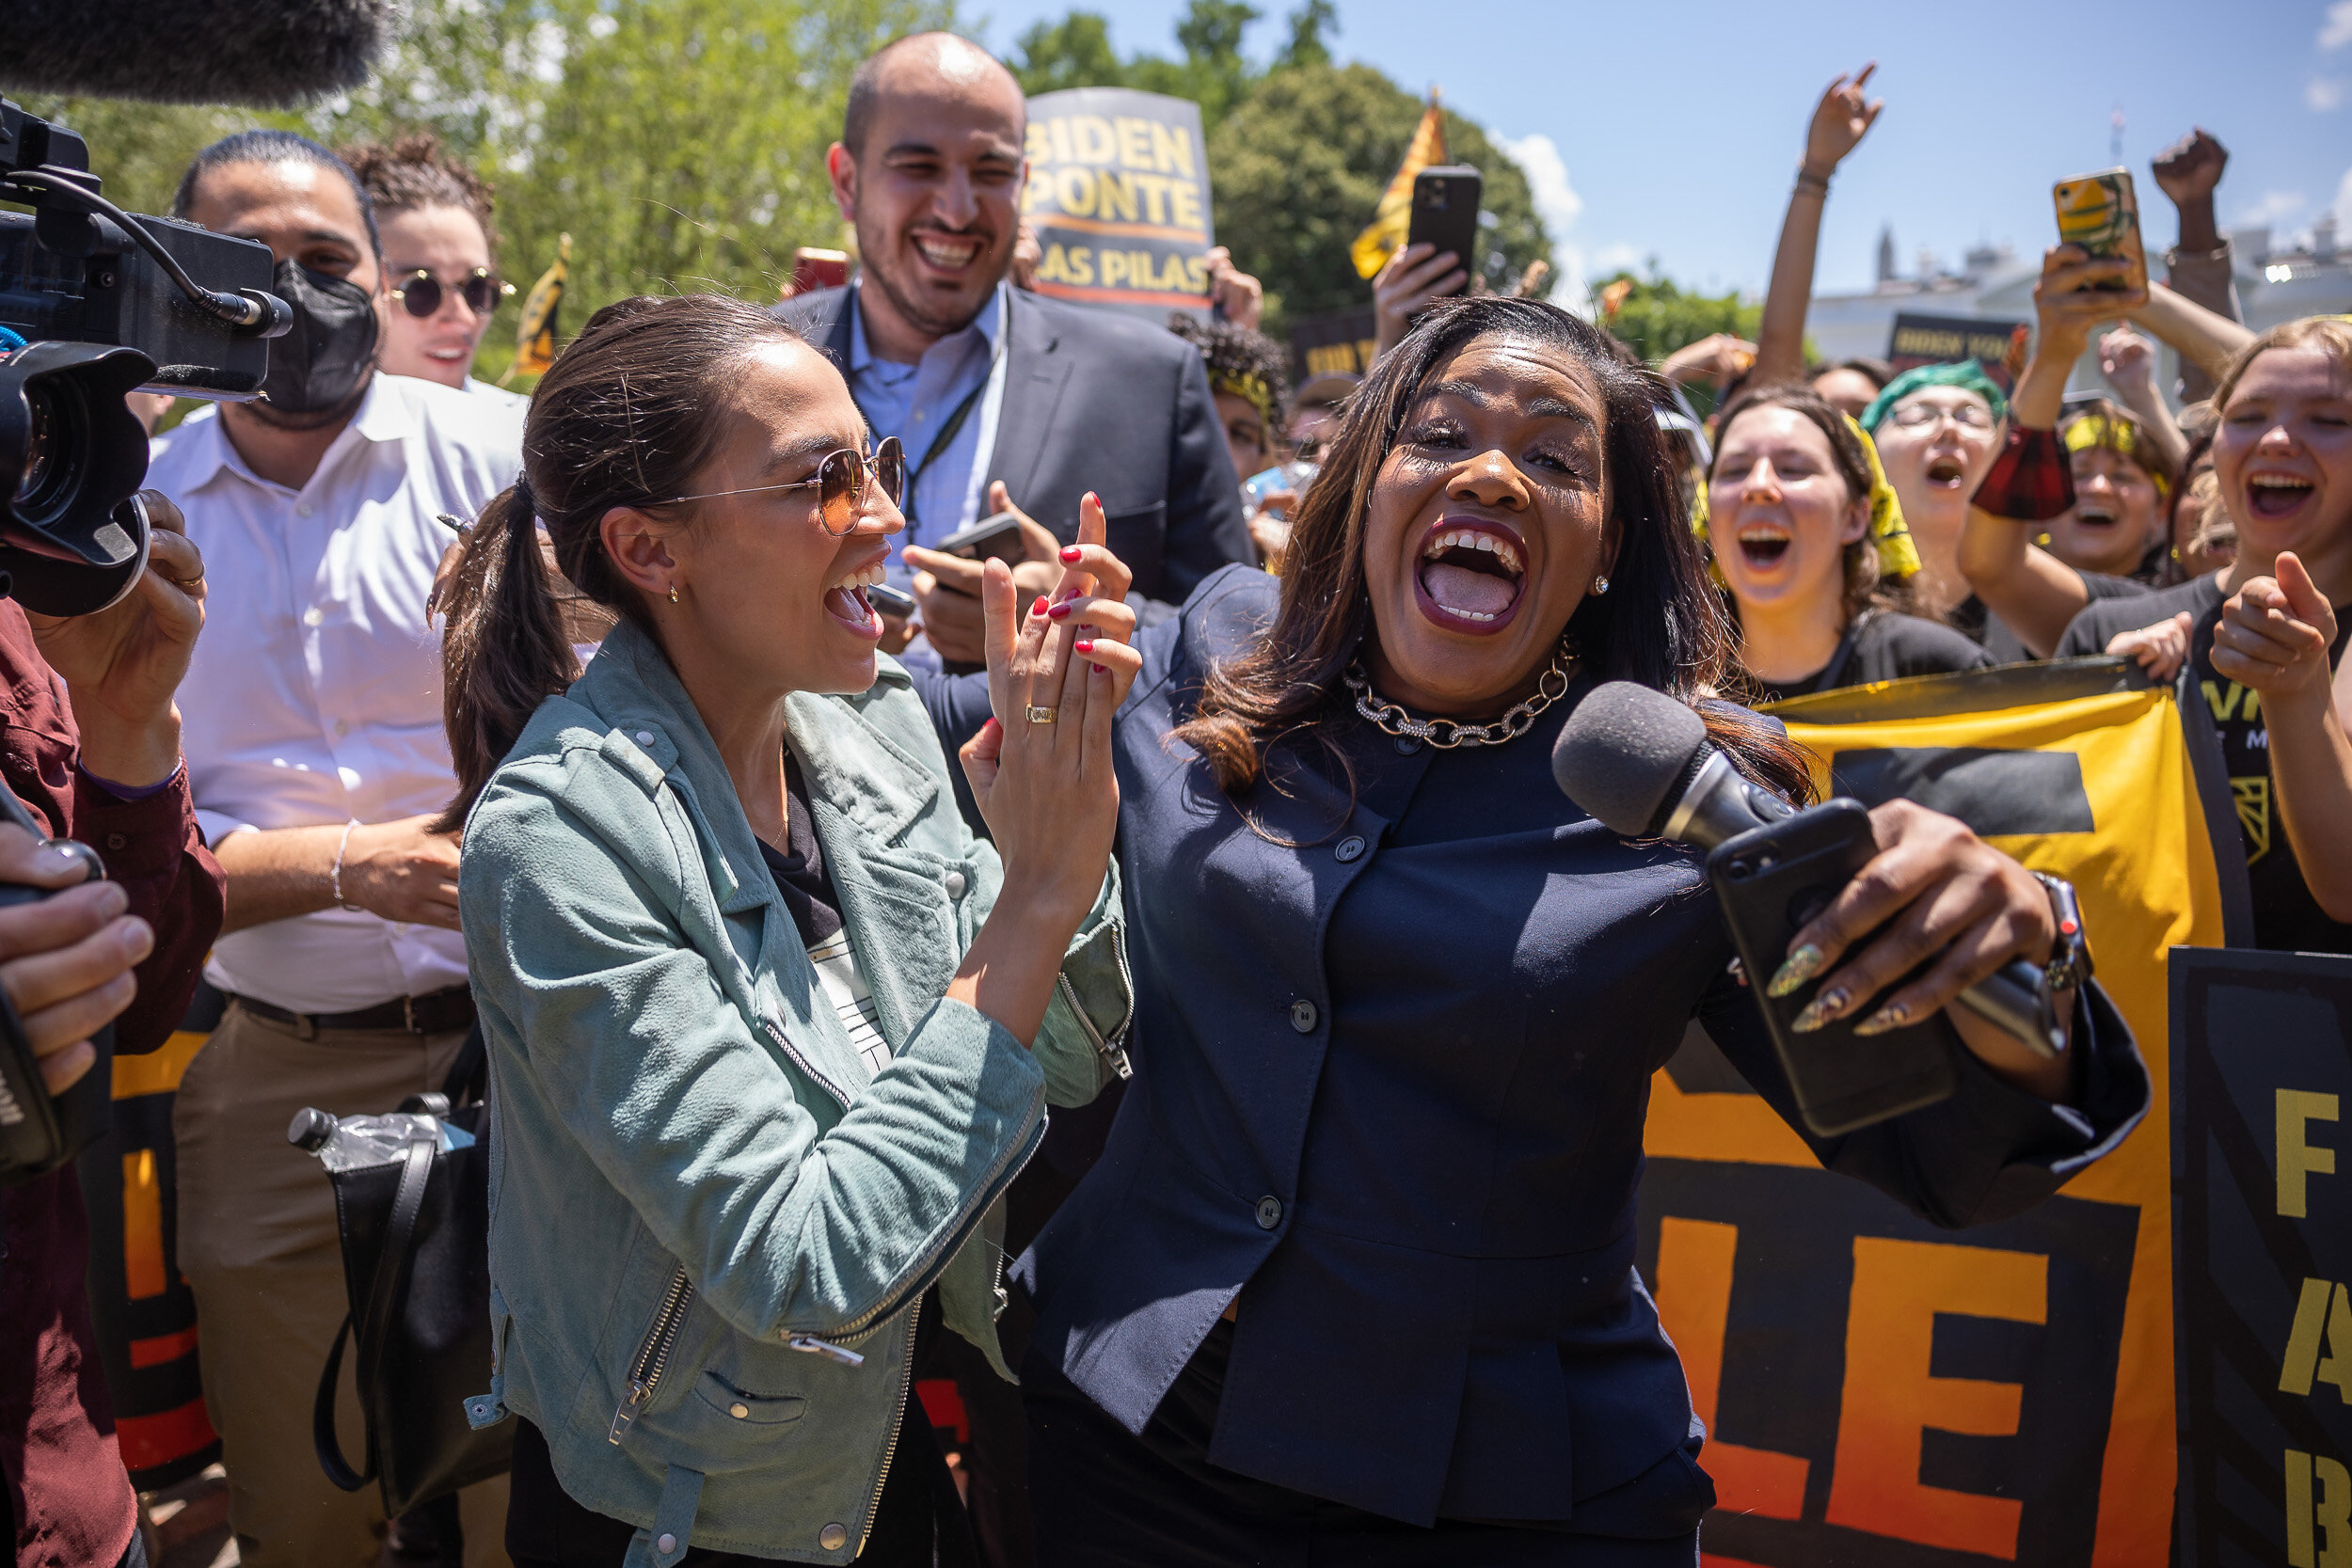  Reps. Alexandria Ocasio-Cortez (D-N.Y.) and Cori Bush (D-Mo.) rally with climate activists from Sunrise Movement in Lafayette Square near the White House June 28, 2021.  